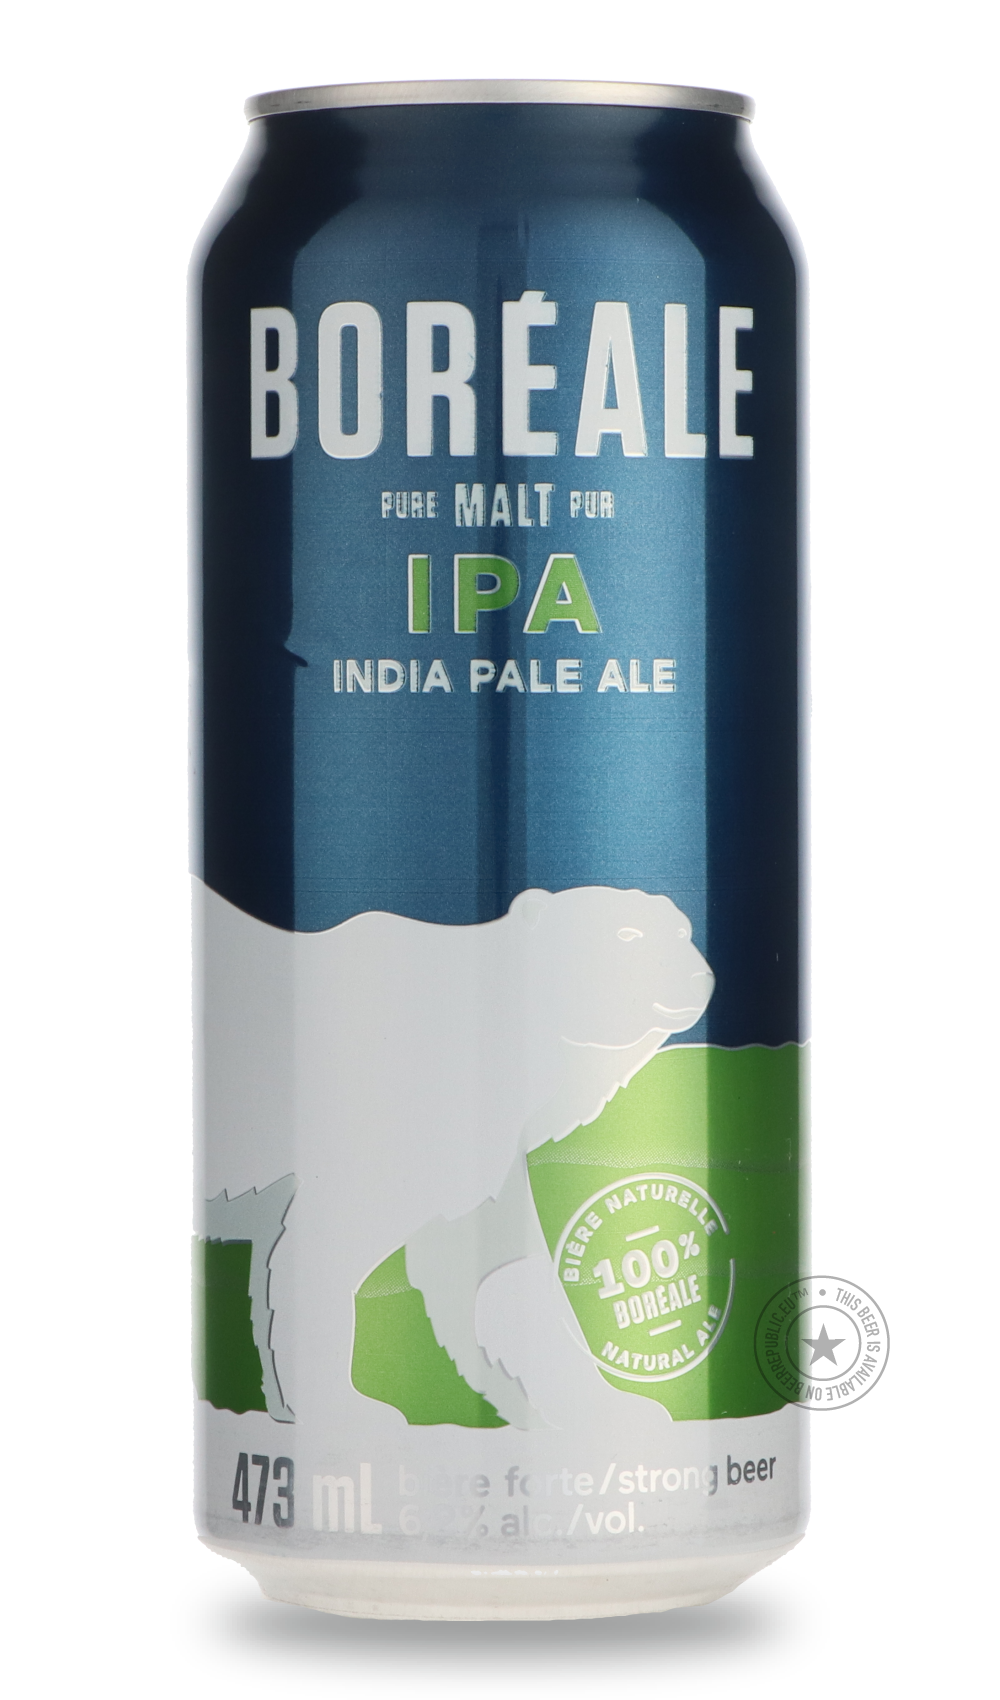 -Boréale- IPA-IPA- Only @ Beer Republic - The best online beer store for American & Canadian craft beer - Buy beer online from the USA and Canada - Bier online kopen - Amerikaans bier kopen - Craft beer store - Craft beer kopen - Amerikanisch bier kaufen - Bier online kaufen - Acheter biere online - IPA - Stout - Porter - New England IPA - Hazy IPA - Imperial Stout - Barrel Aged - Barrel Aged Imperial Stout - Brown - Dark beer - Blond - Blonde - Pilsner - Lager - Wheat - Weizen - Amber - Barley Wine - Quadr